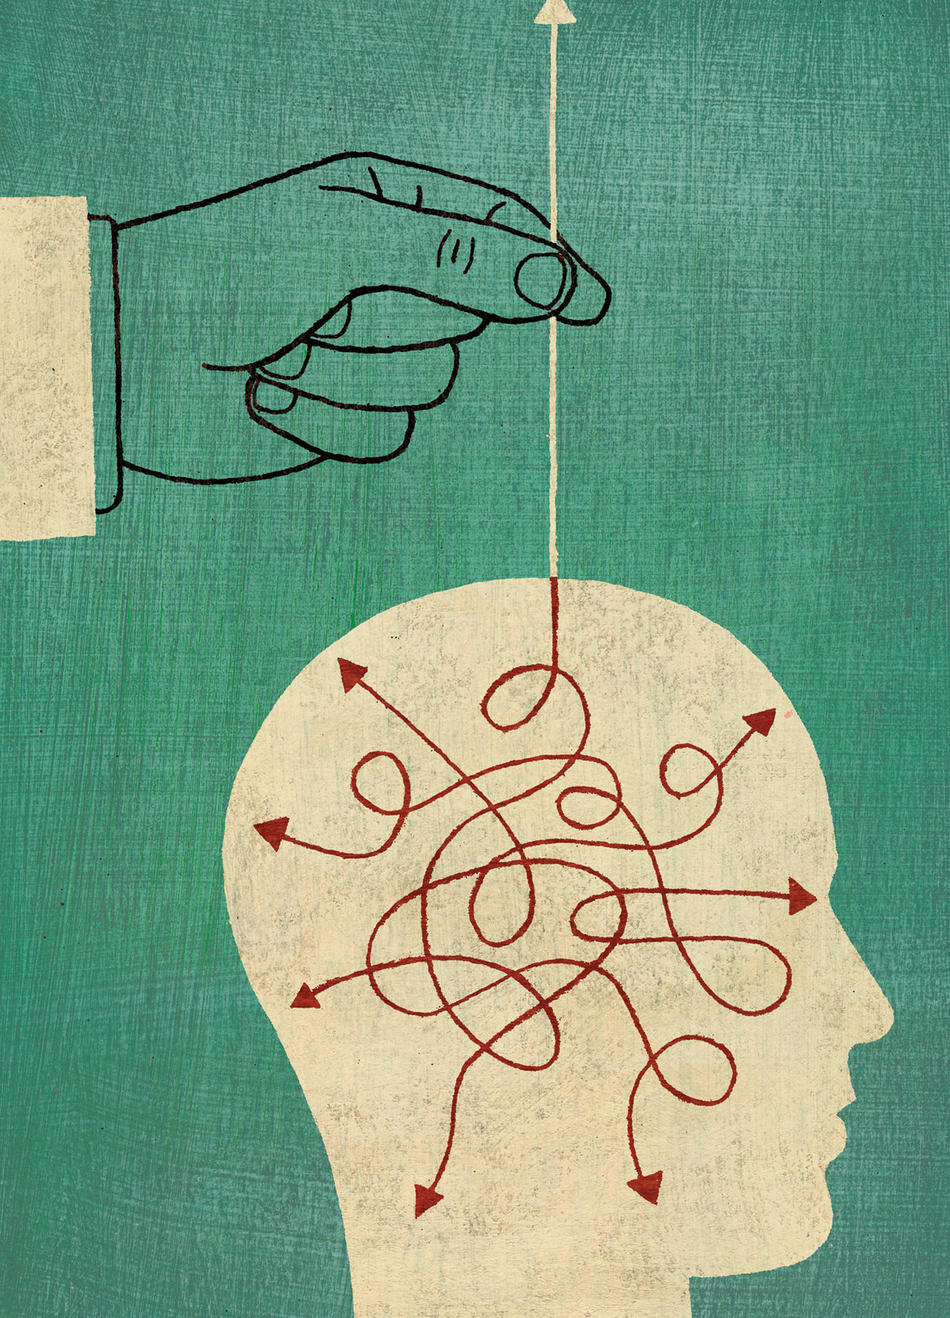 Illustration of hand manipulating thoughts in brain